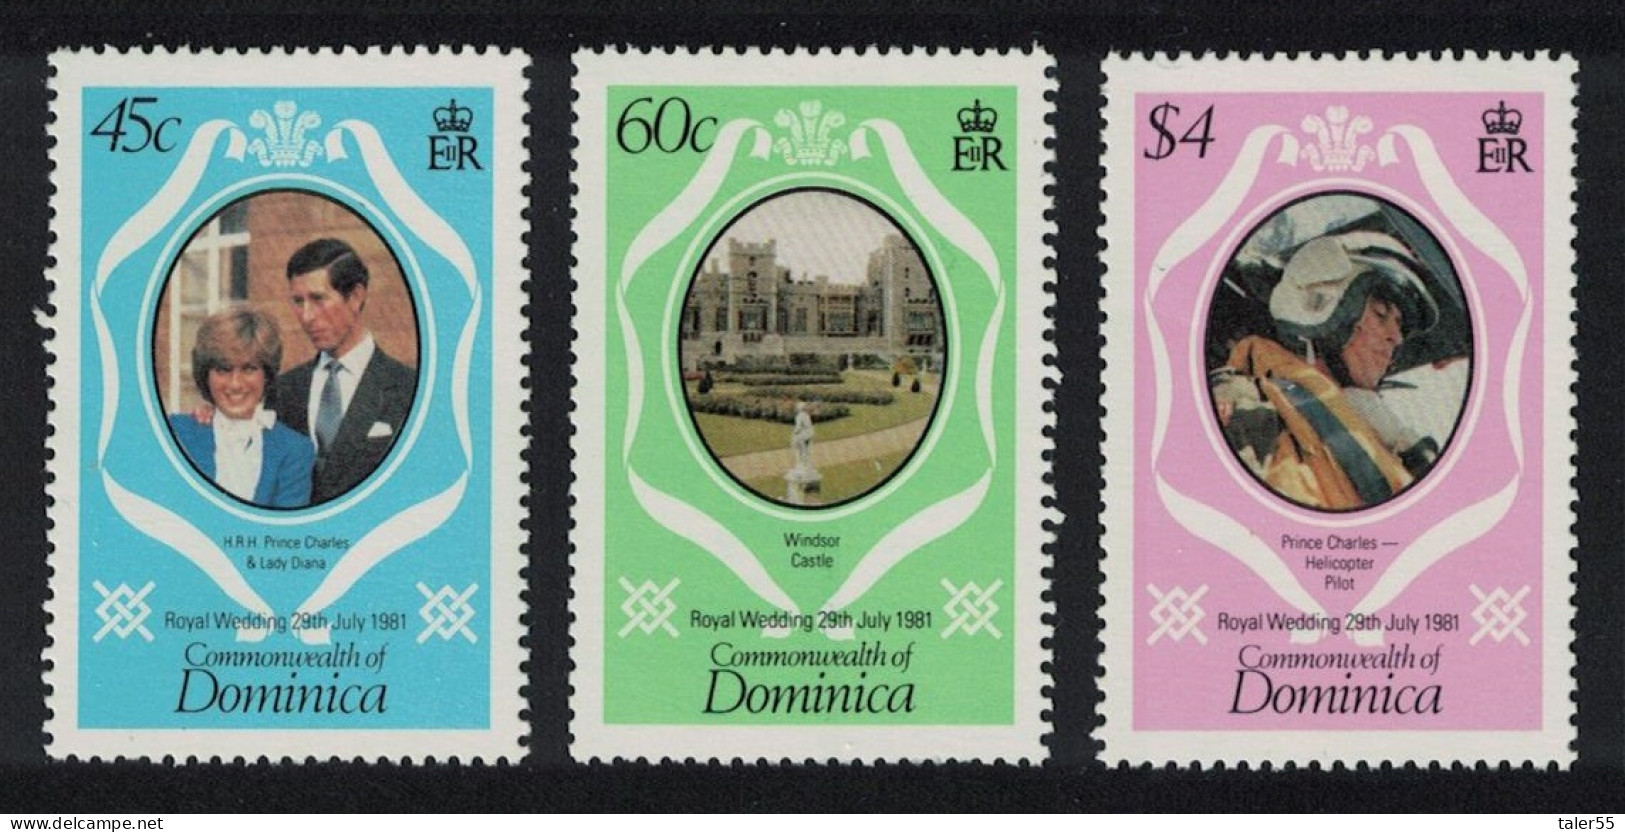 Dominica Charles And Diana Royal Wedding 3v Perf 14 1981 MNH SG#747-749 MI#713-715 - Dominica (1978-...)